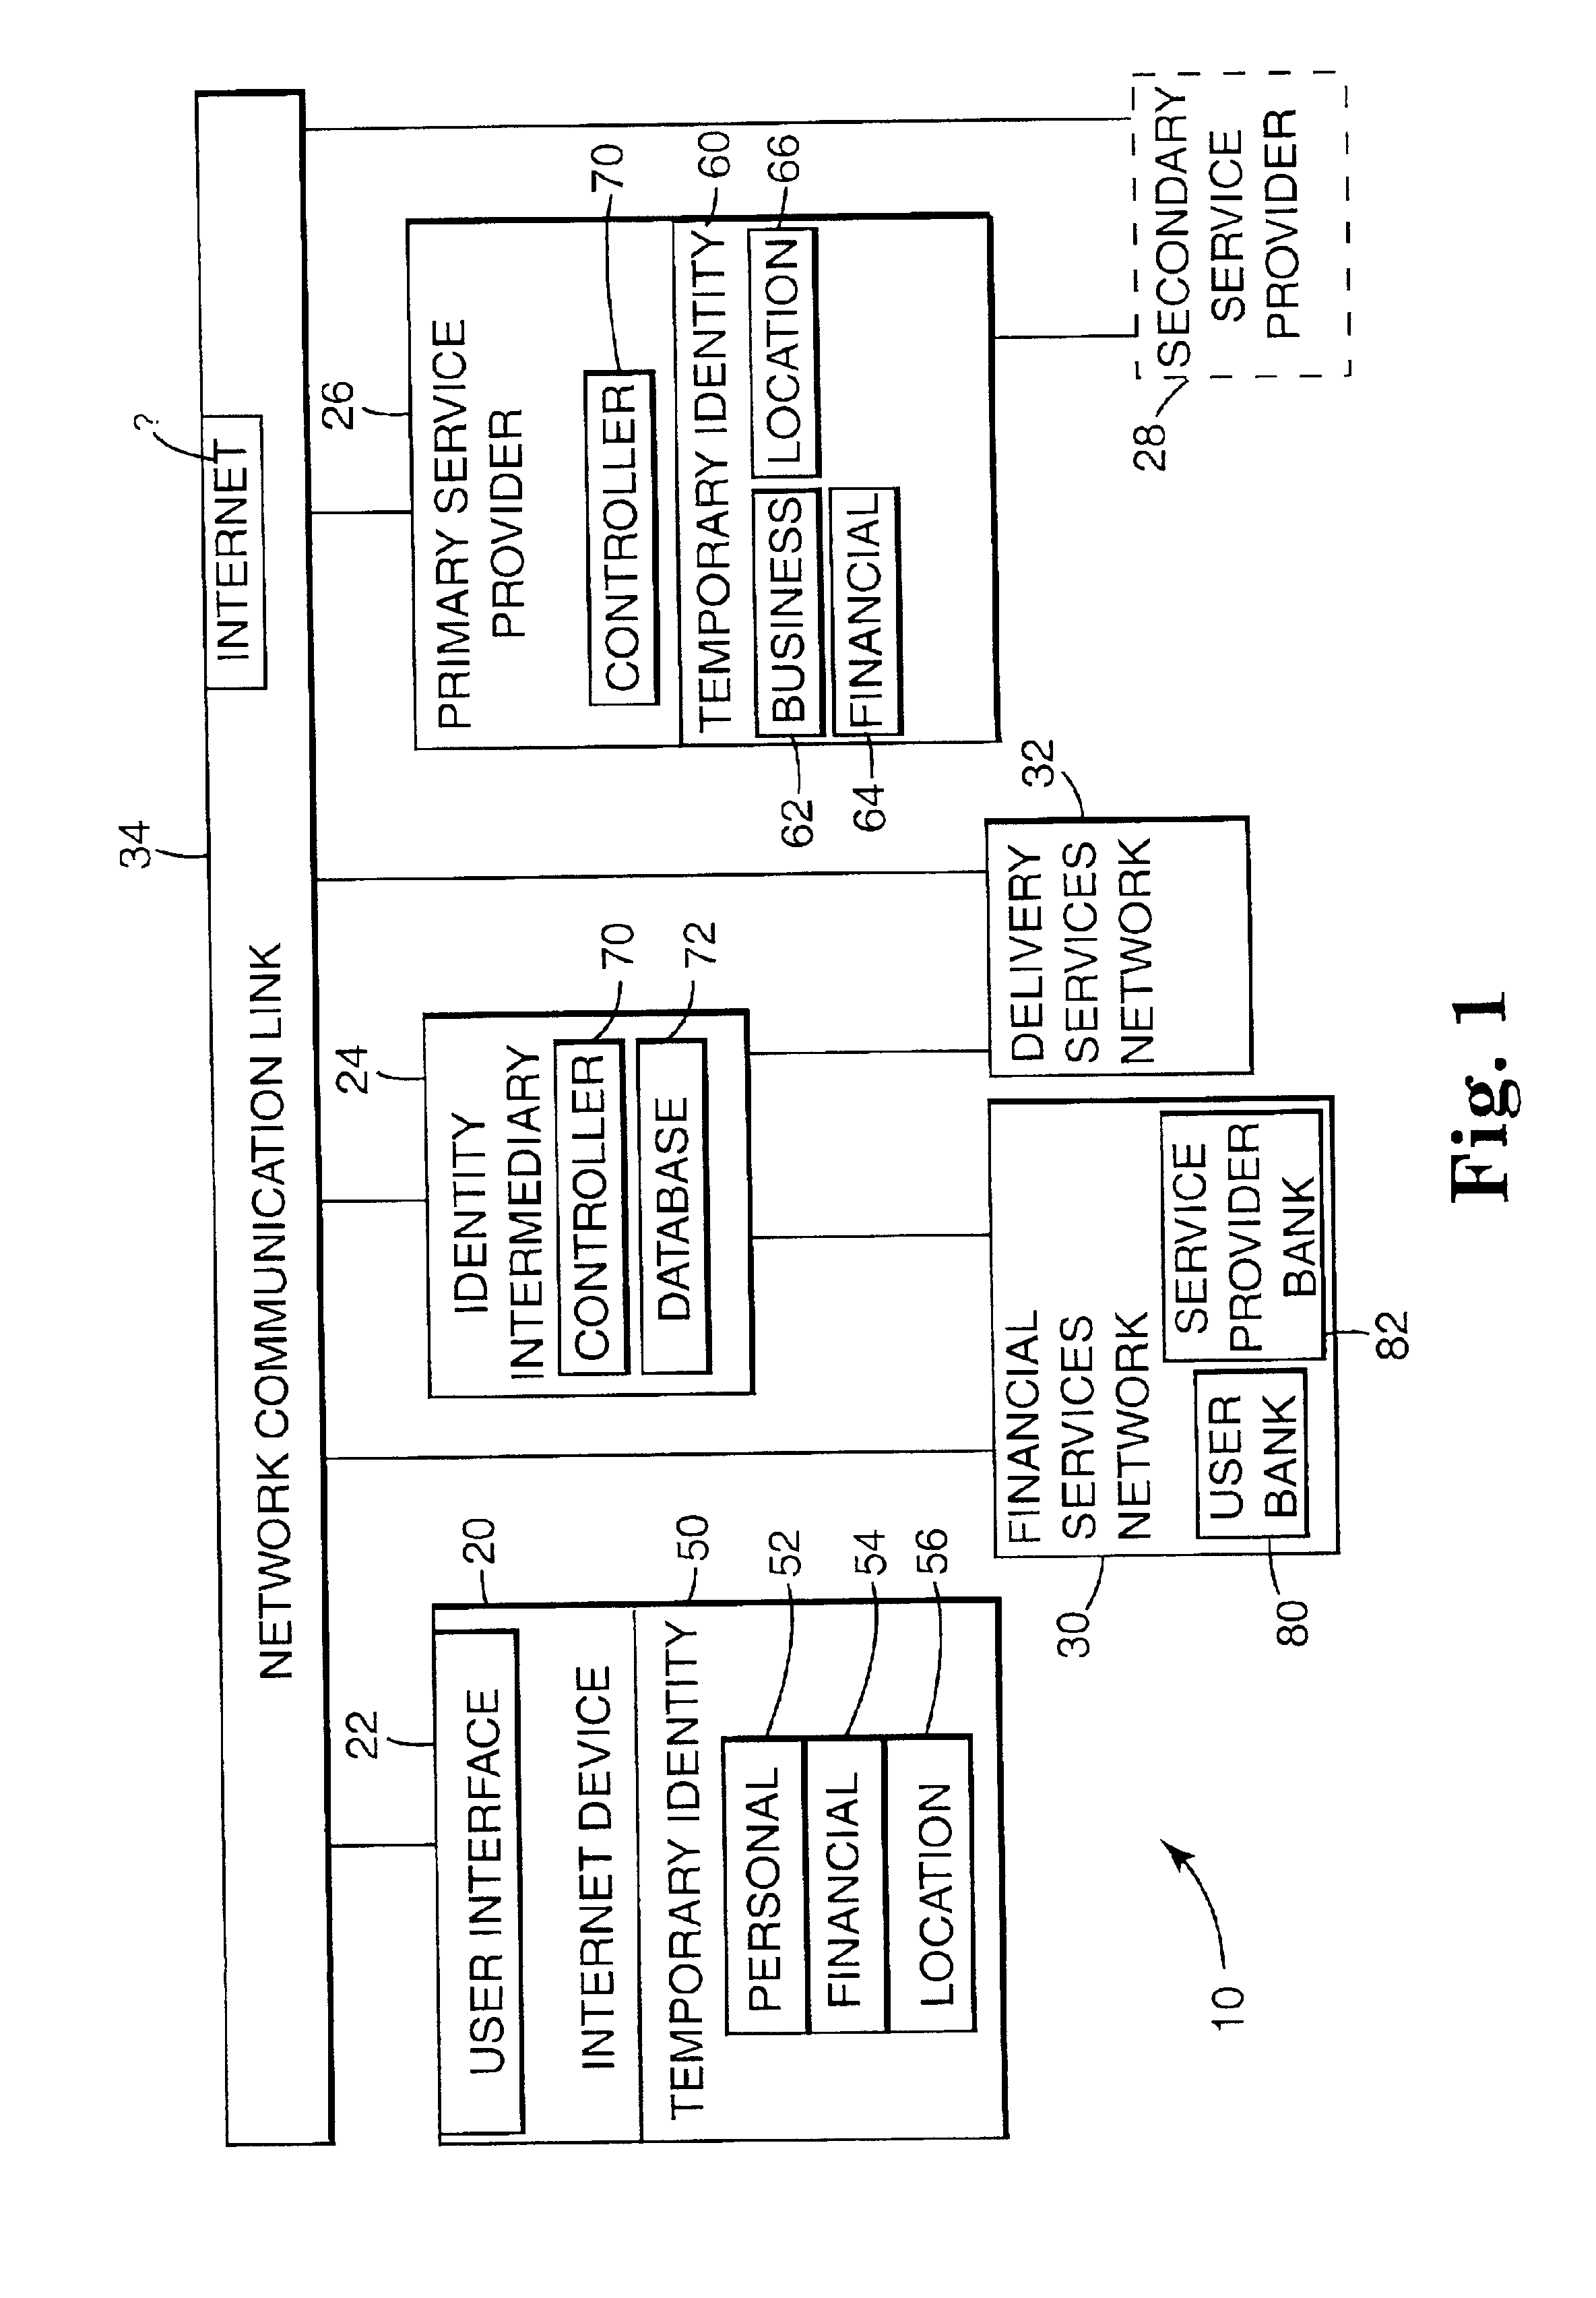 Method and system for temporary network identity